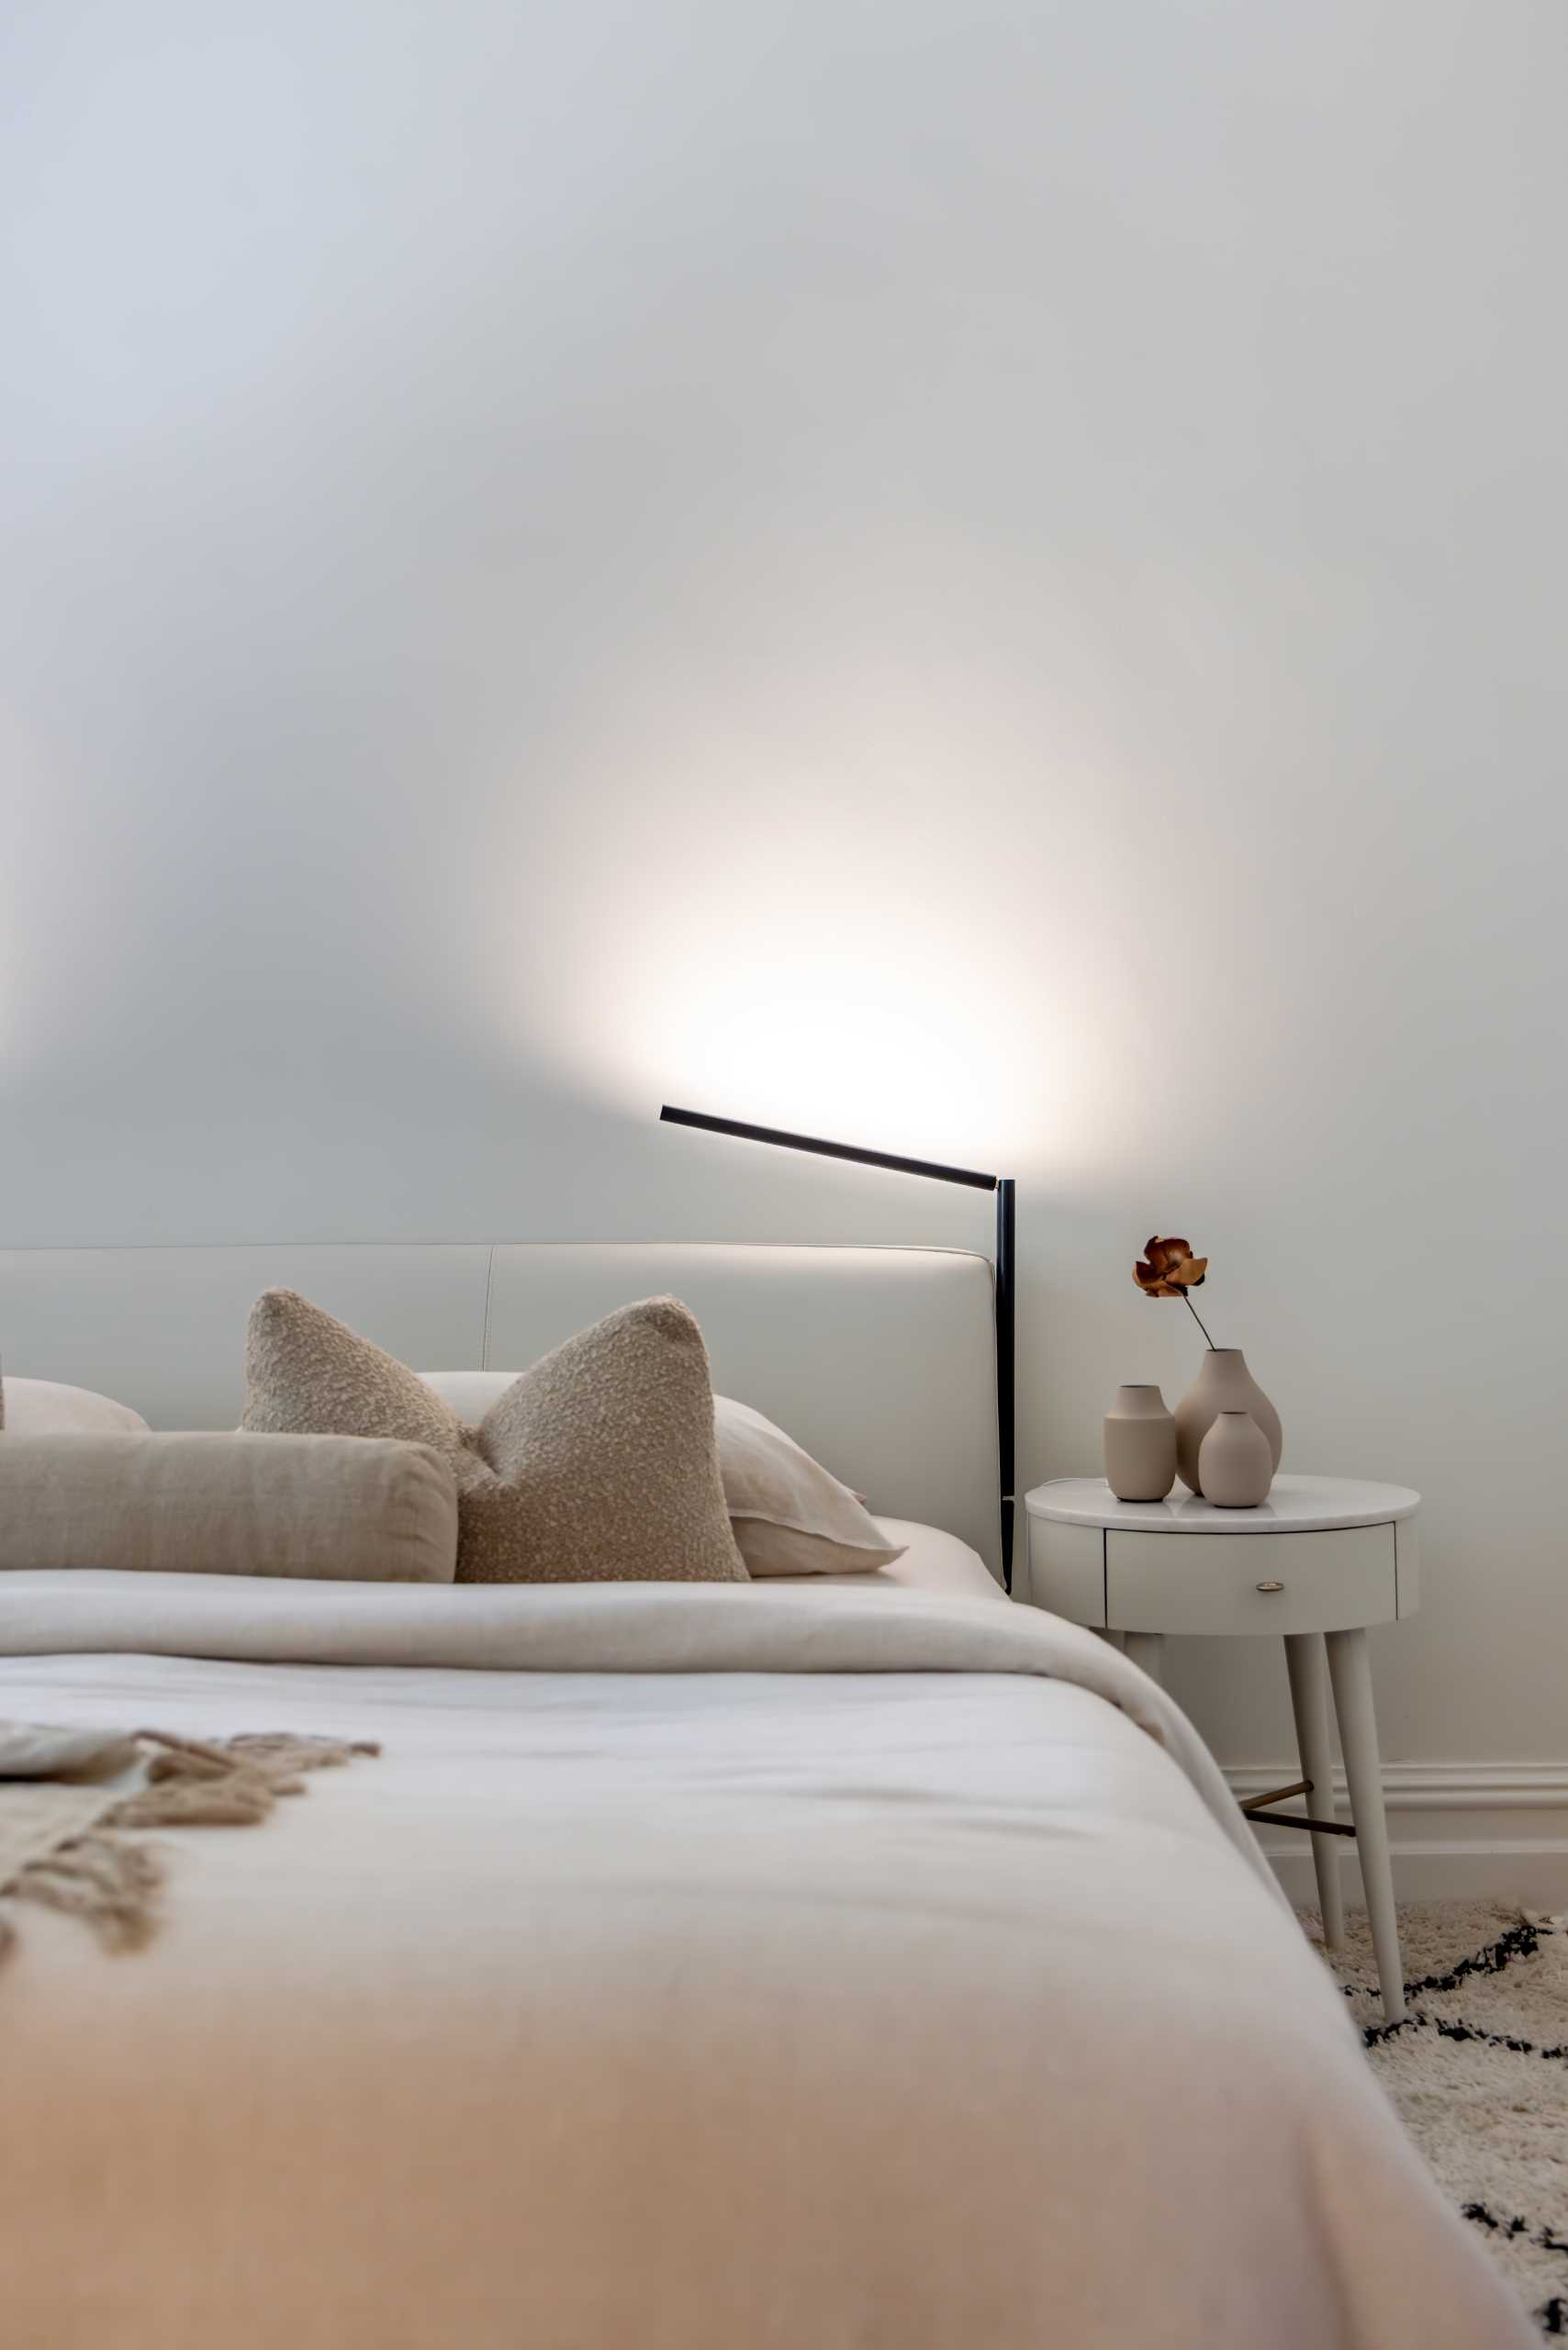 A minimalist design was chosen for the bedroom, with neutral furnishings and color palette.